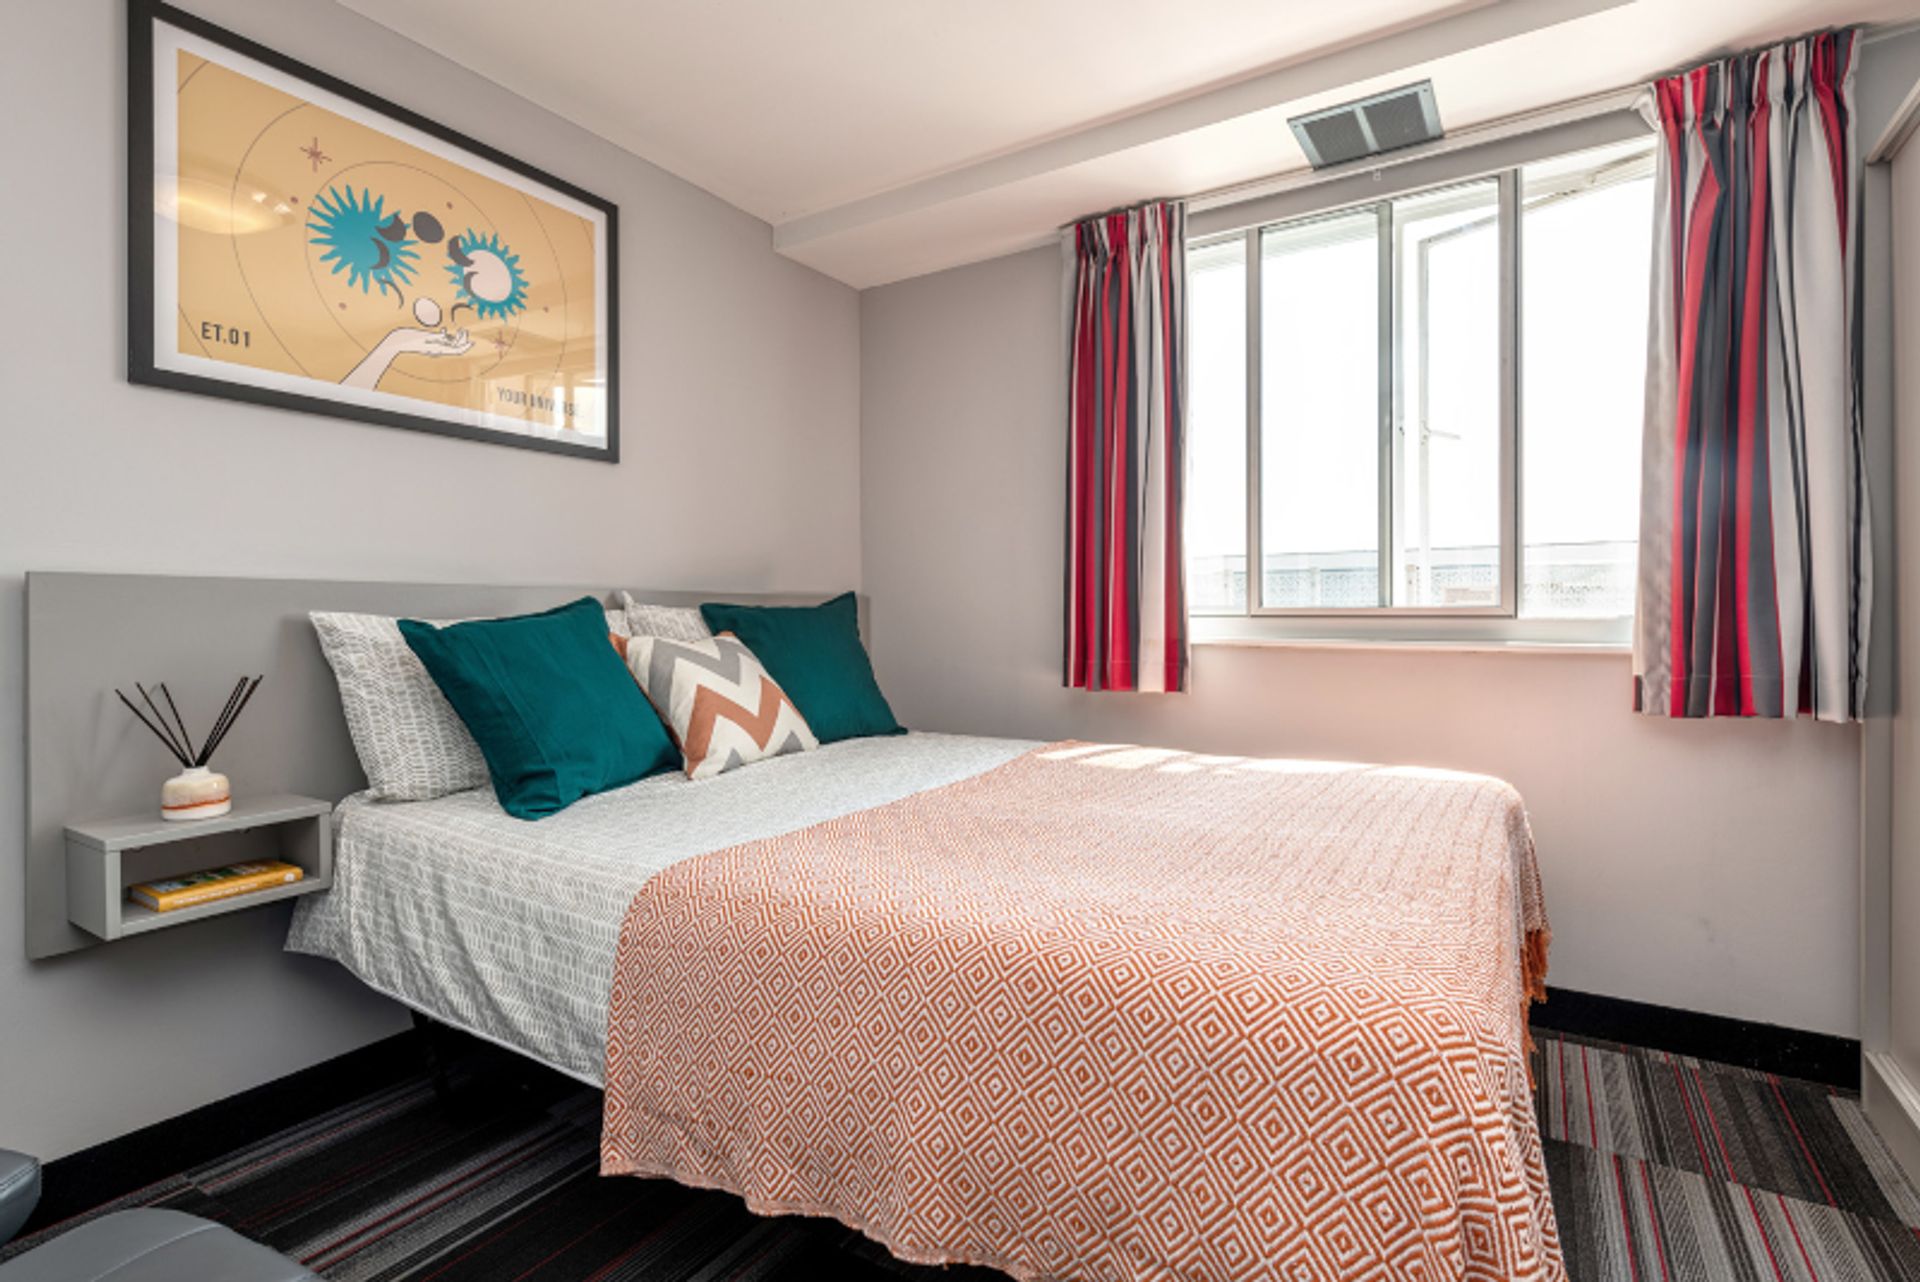 Prime Student Living At The Moor: Your Ideal Sheffield Housing Awaits